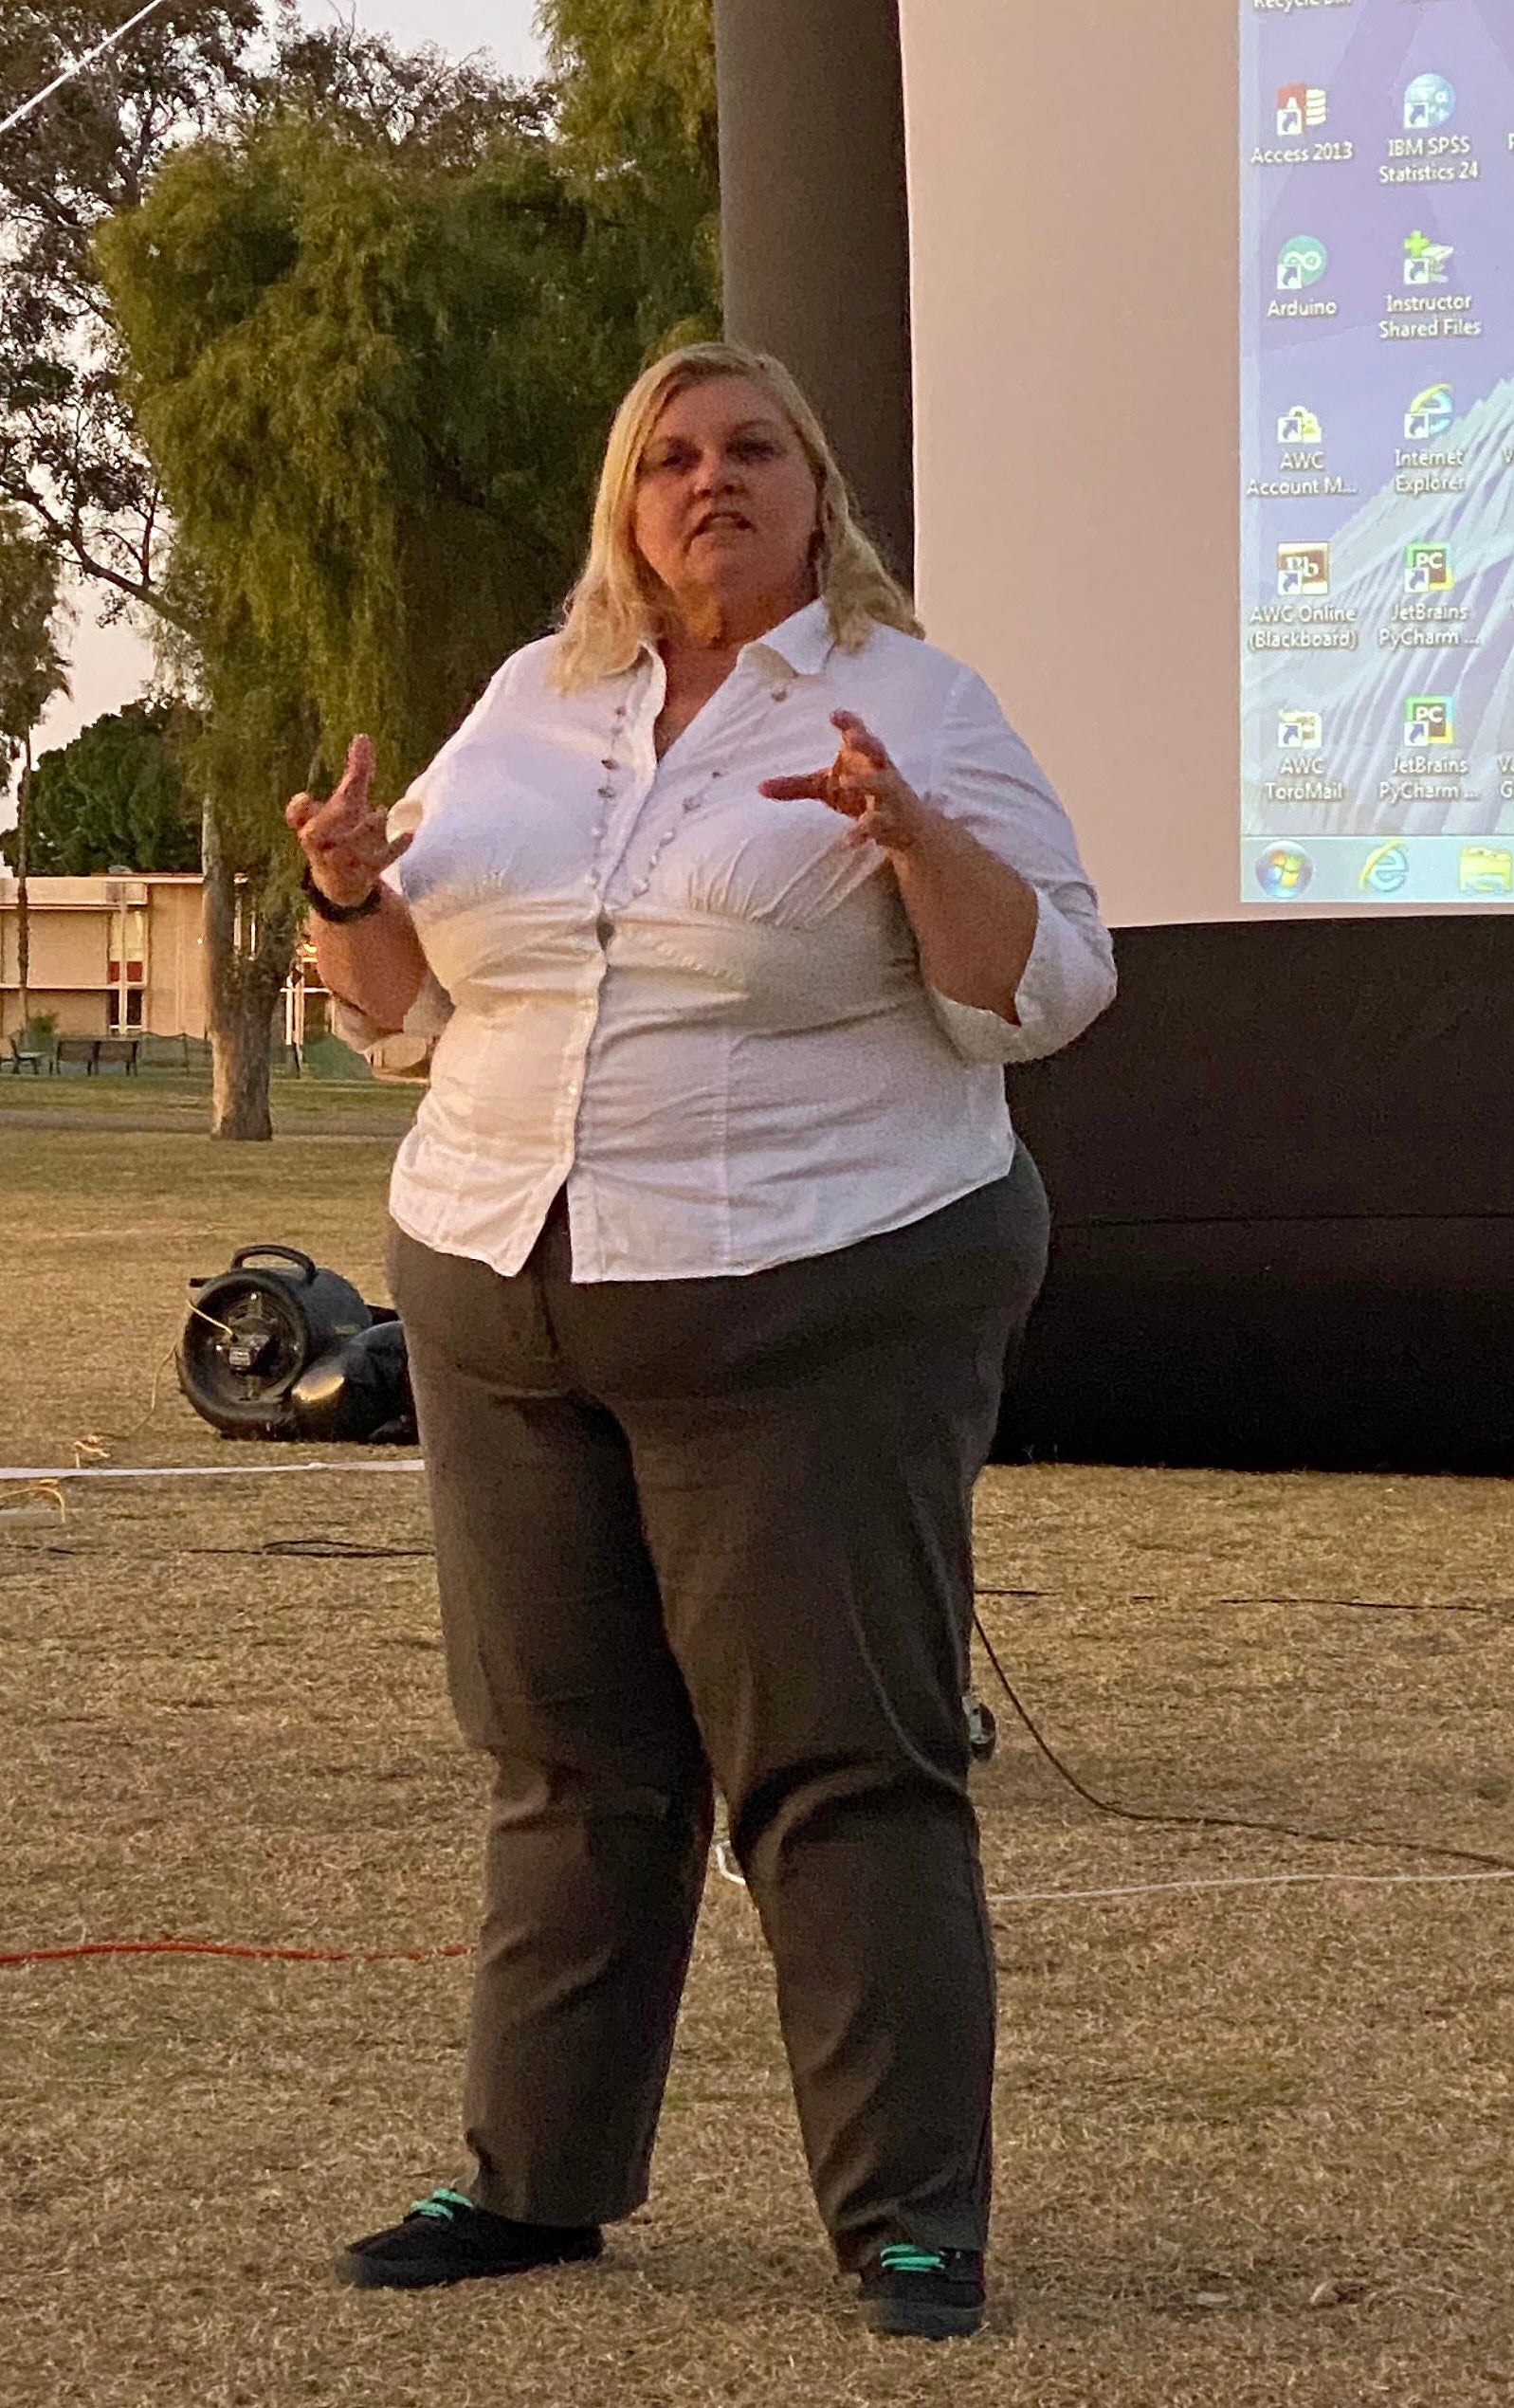 A blonde woman in a white shirt is speaking outdoors in front of a projection screen.